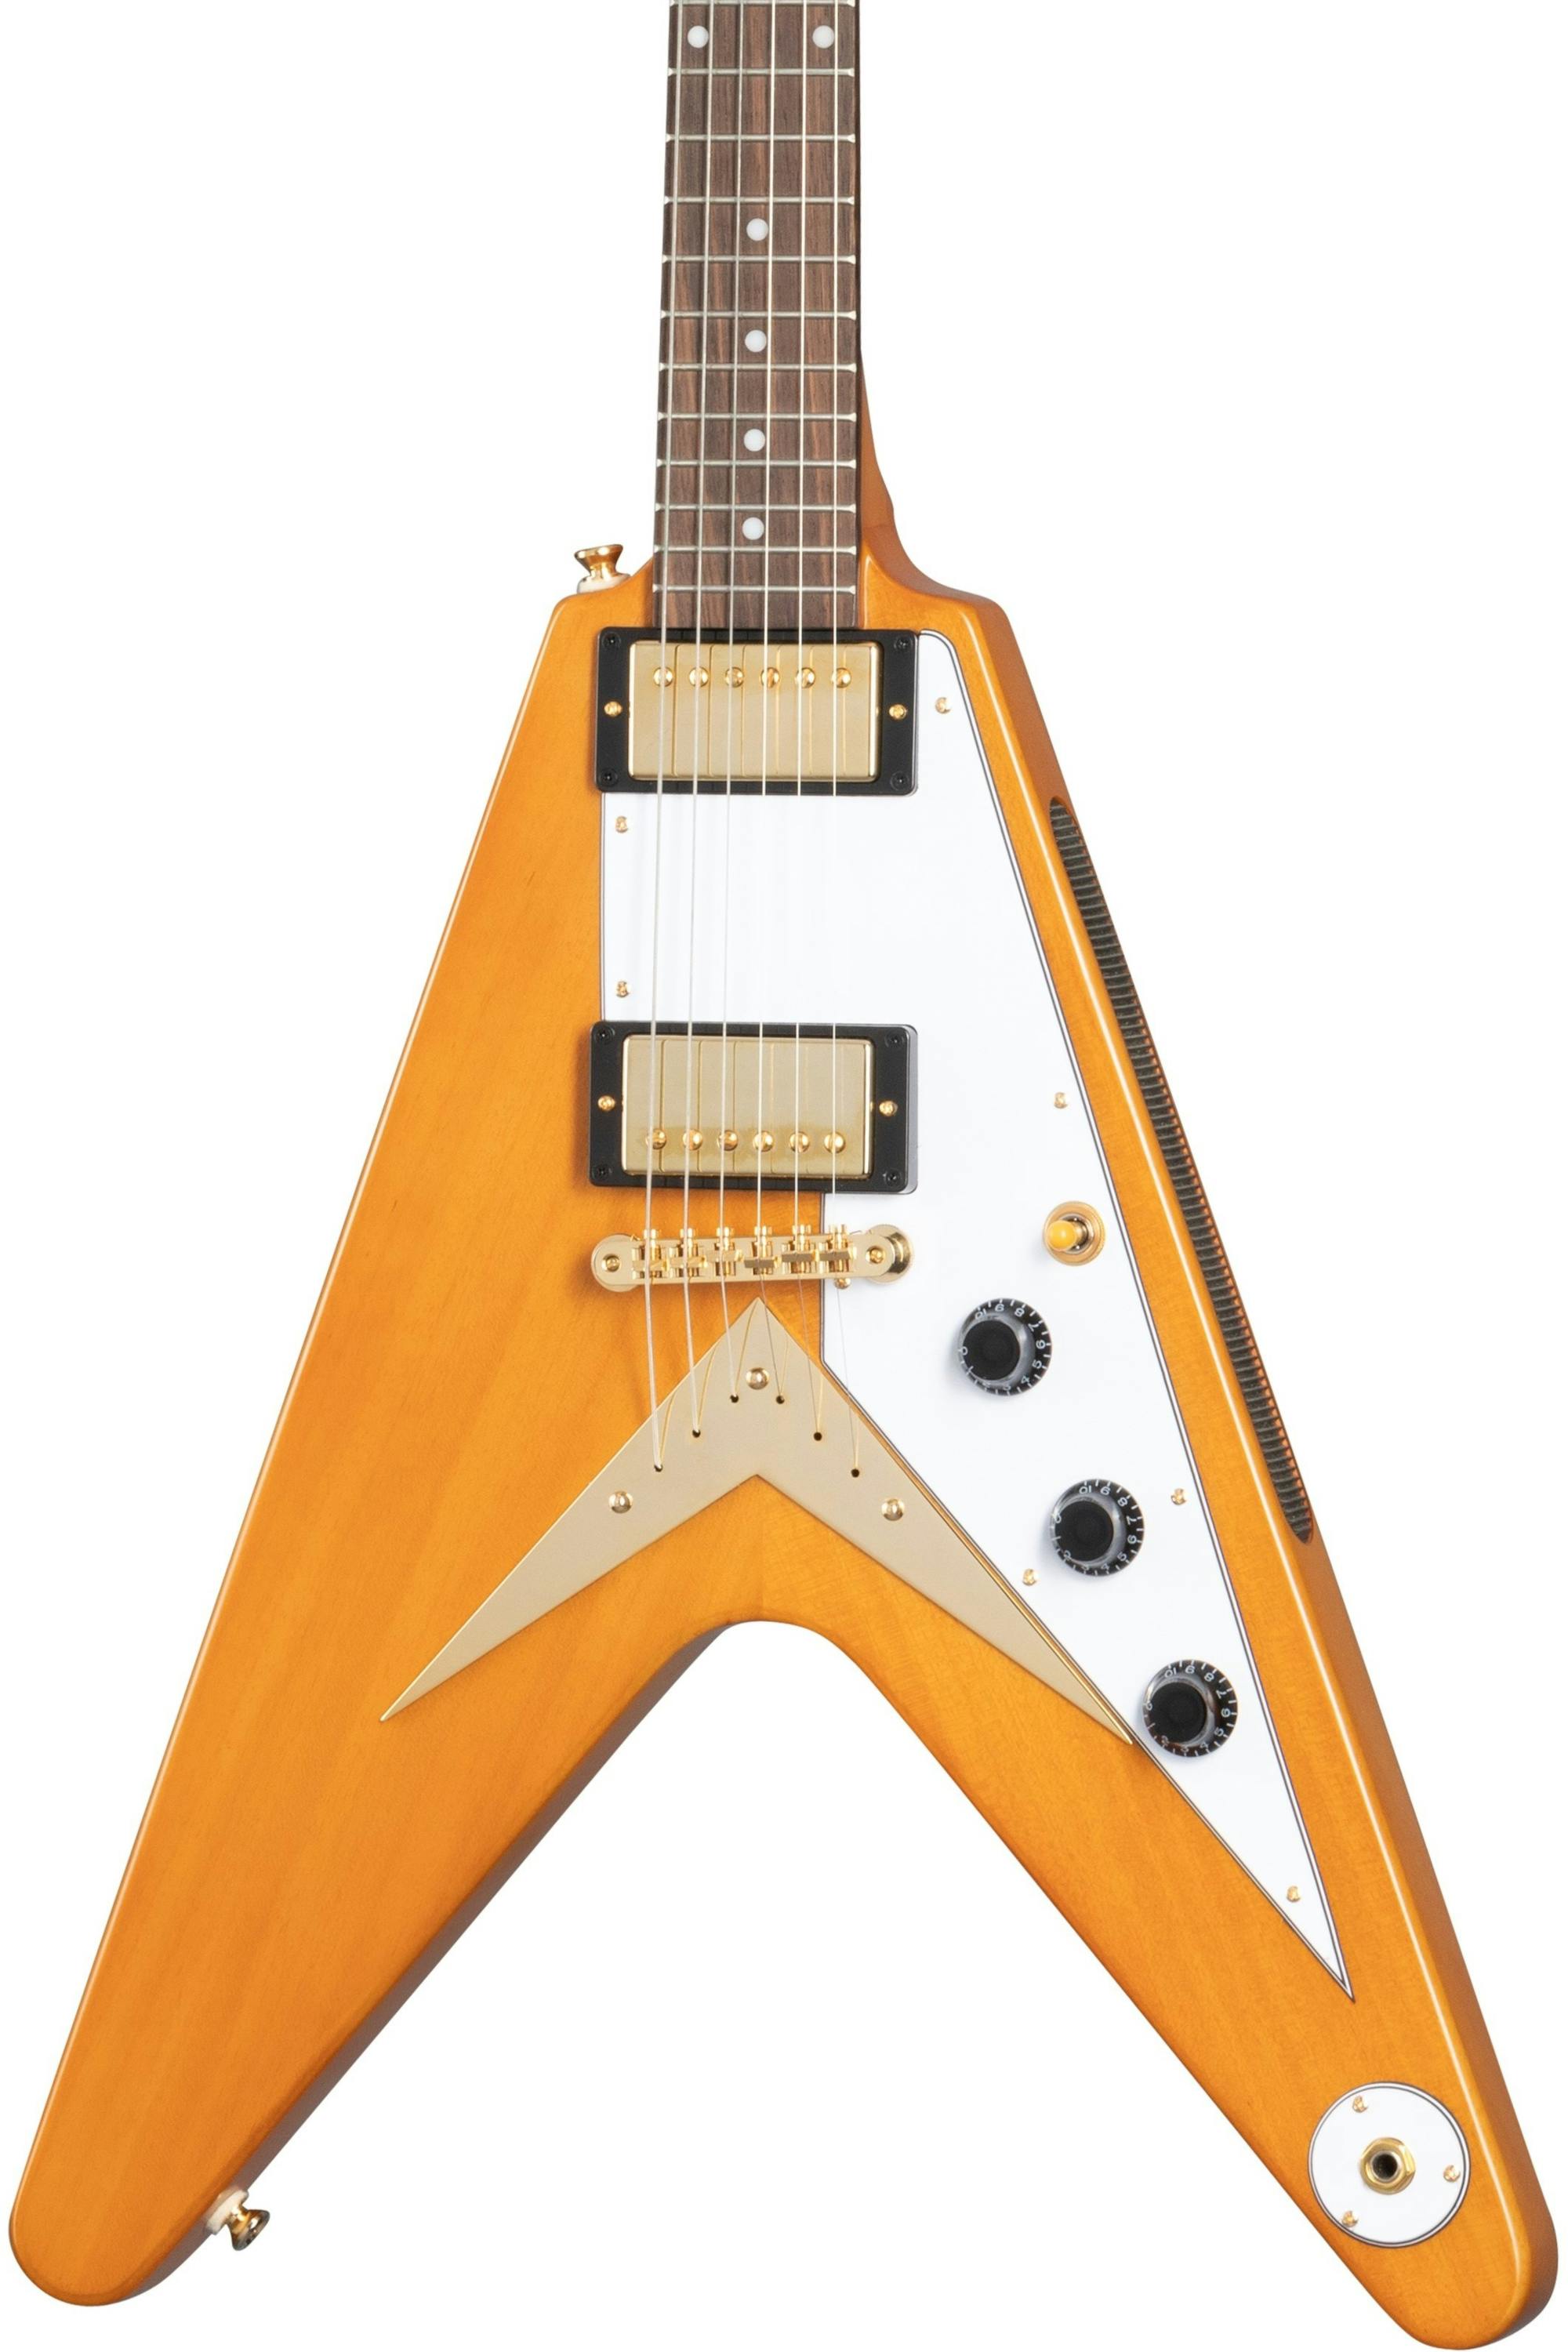 Epiphone 1958 Korina Flying V Electric Guitar in Aged Natural with